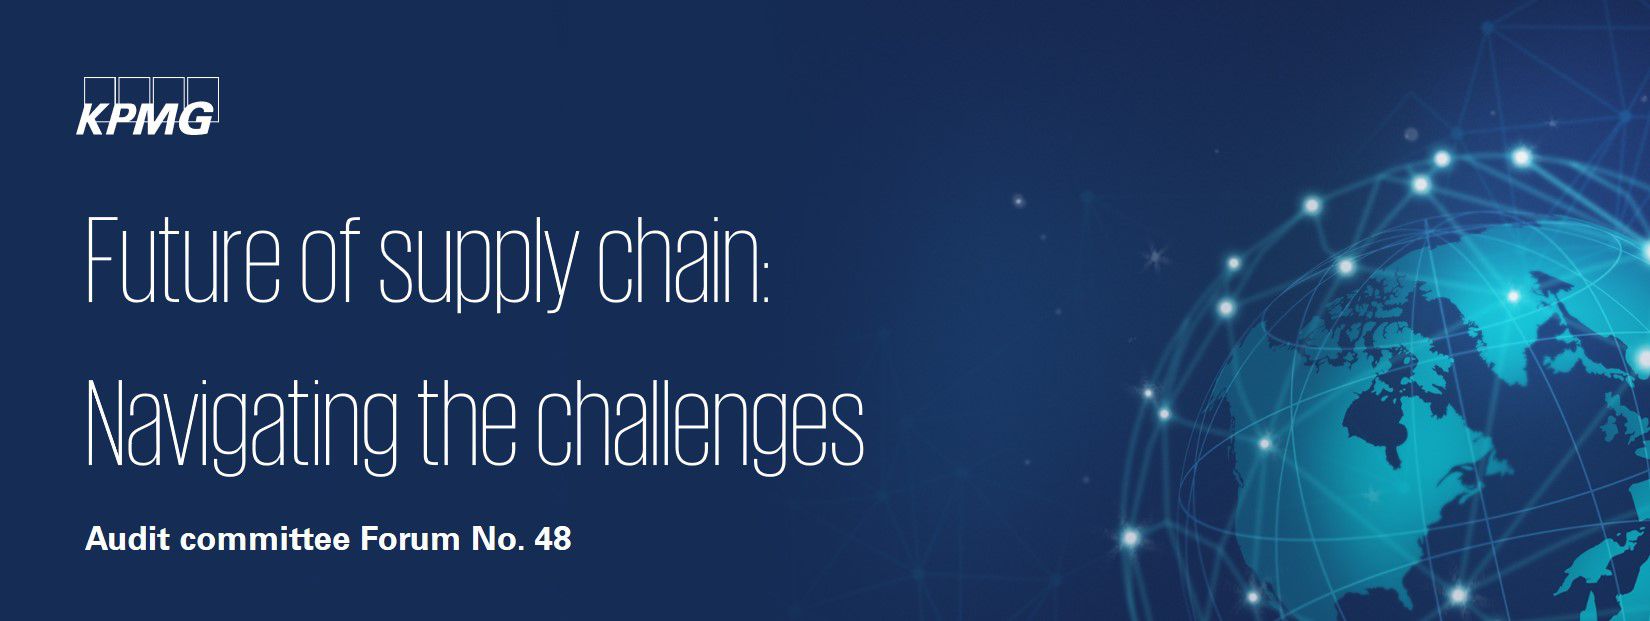 Future of supply chain: Navigating the challenges